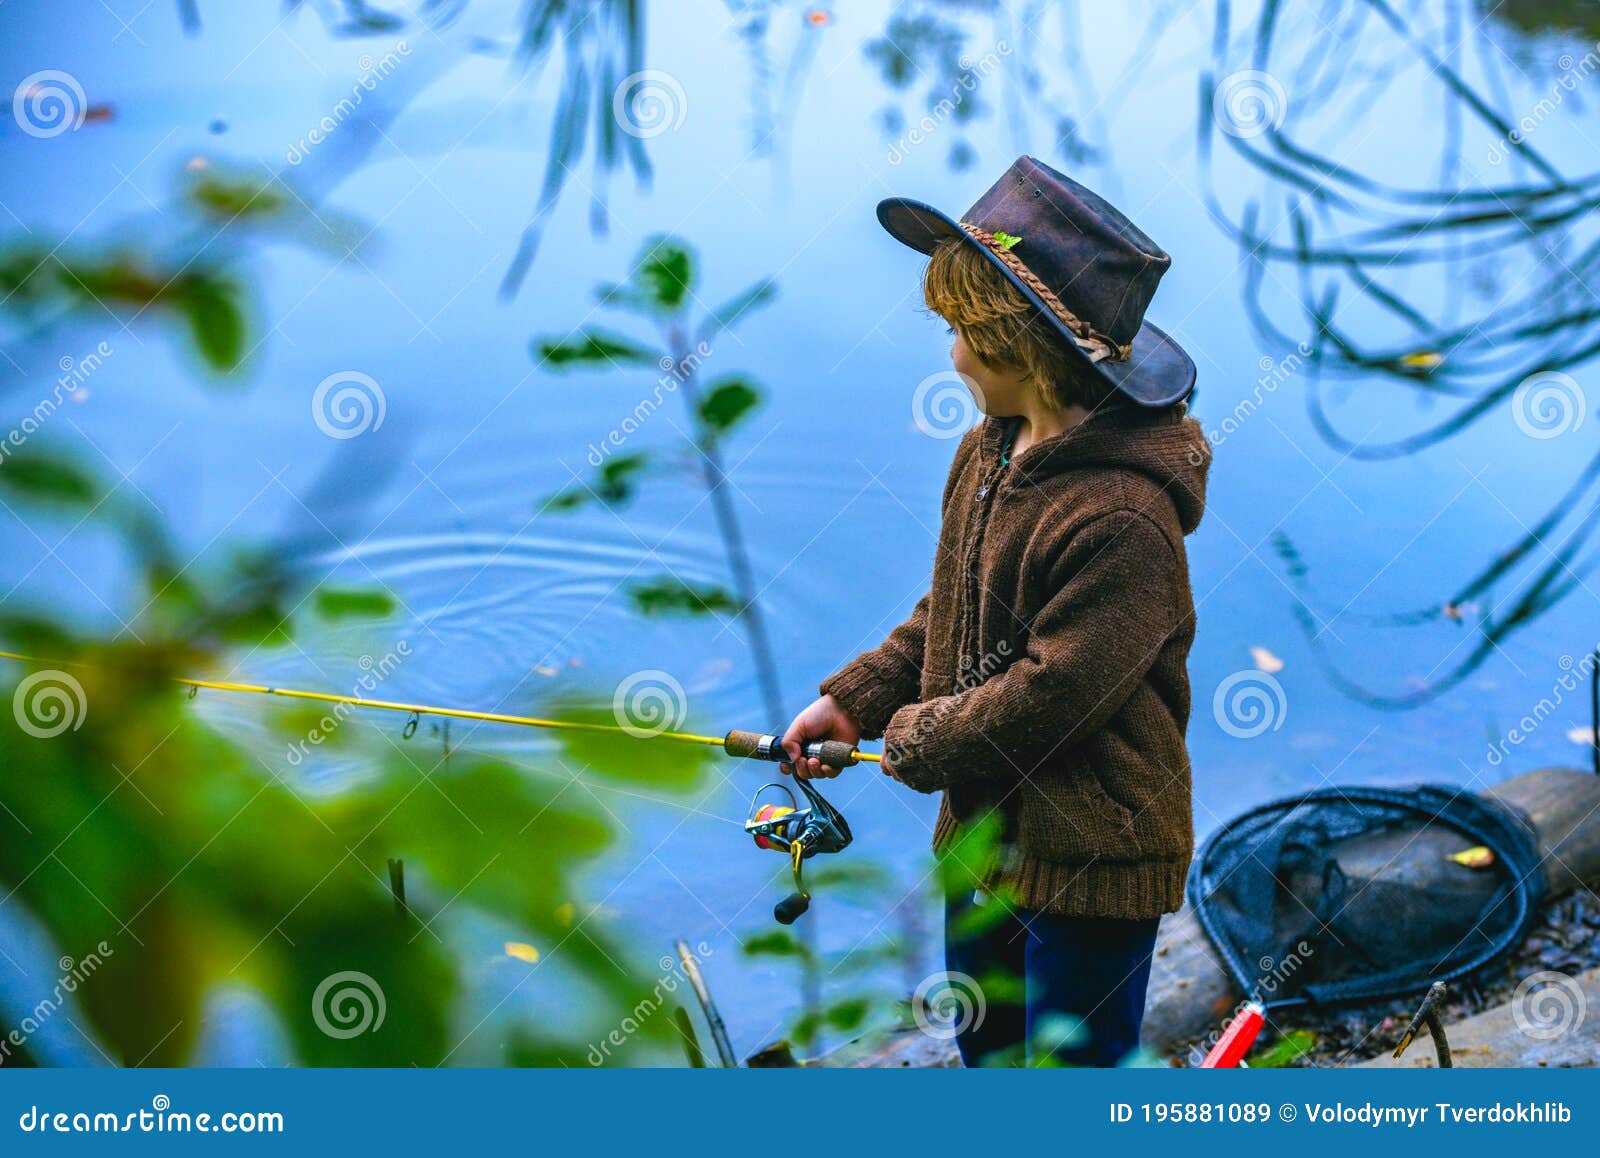 Little Boy Fishing in Overalls from a Dock on Lake or Pond. Child with a  Fishing Rod Standing by the Water Stock Image - Image of weekend, fishrod:  195881089